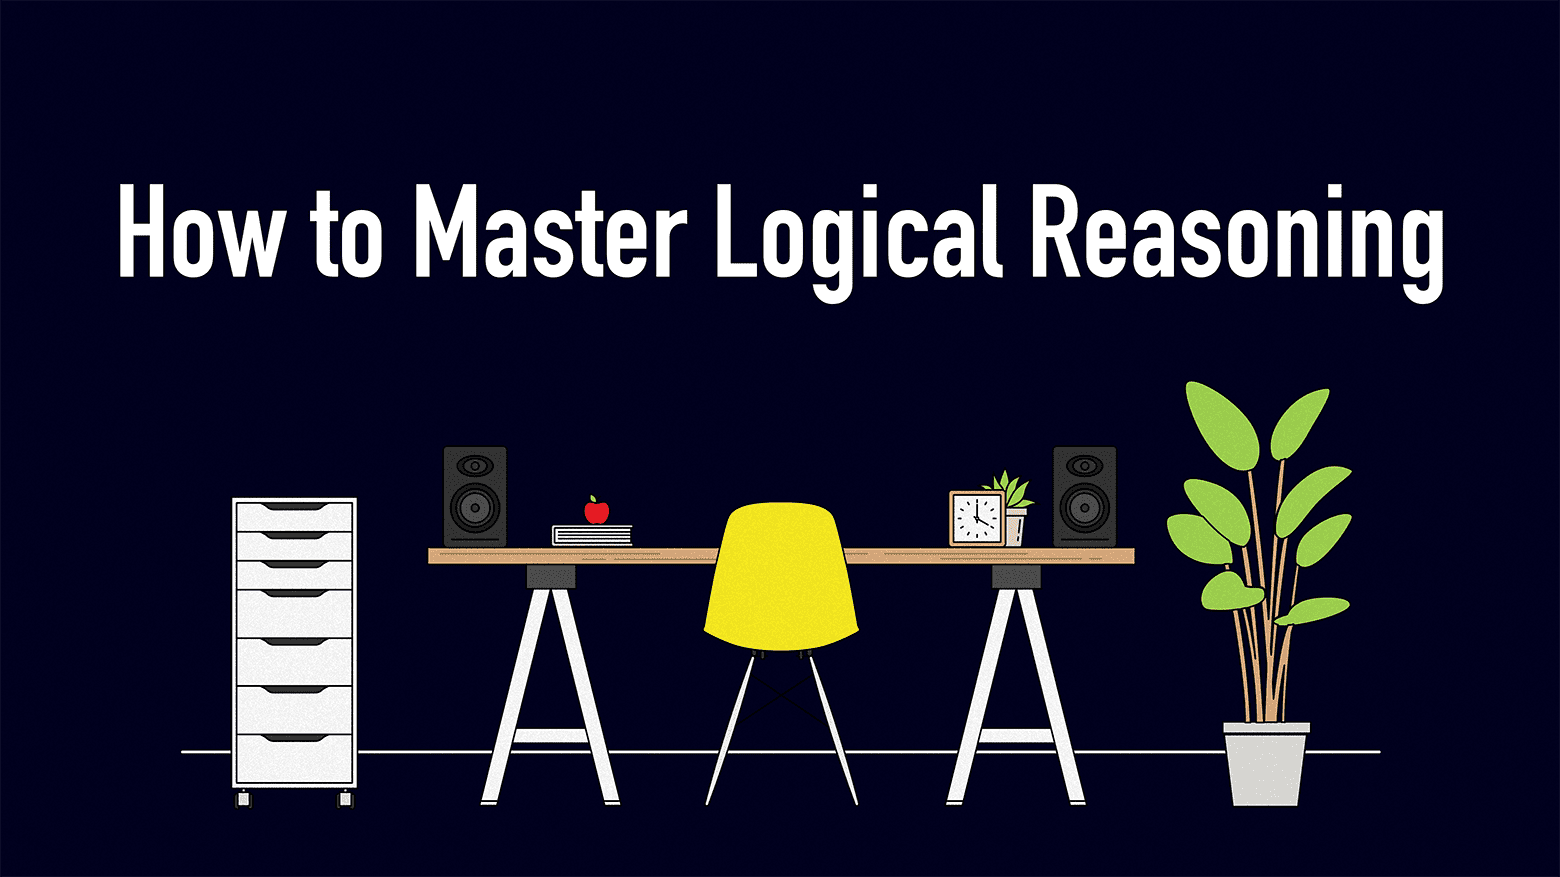 Essential Logical Reasoning Tips and Information